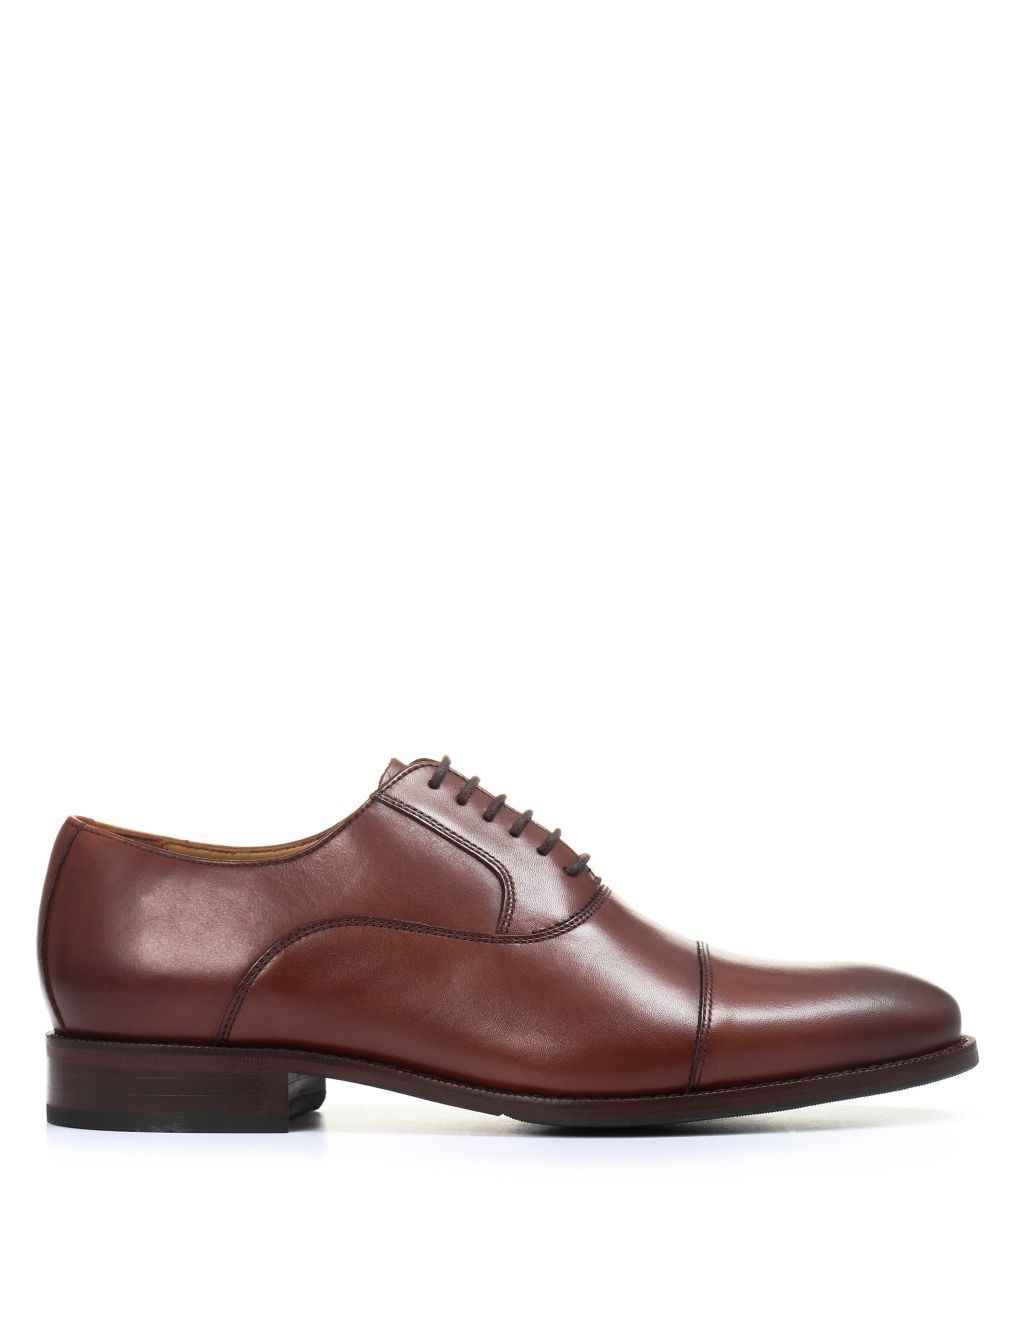 Men’s Oxford Shoes Available at M&S